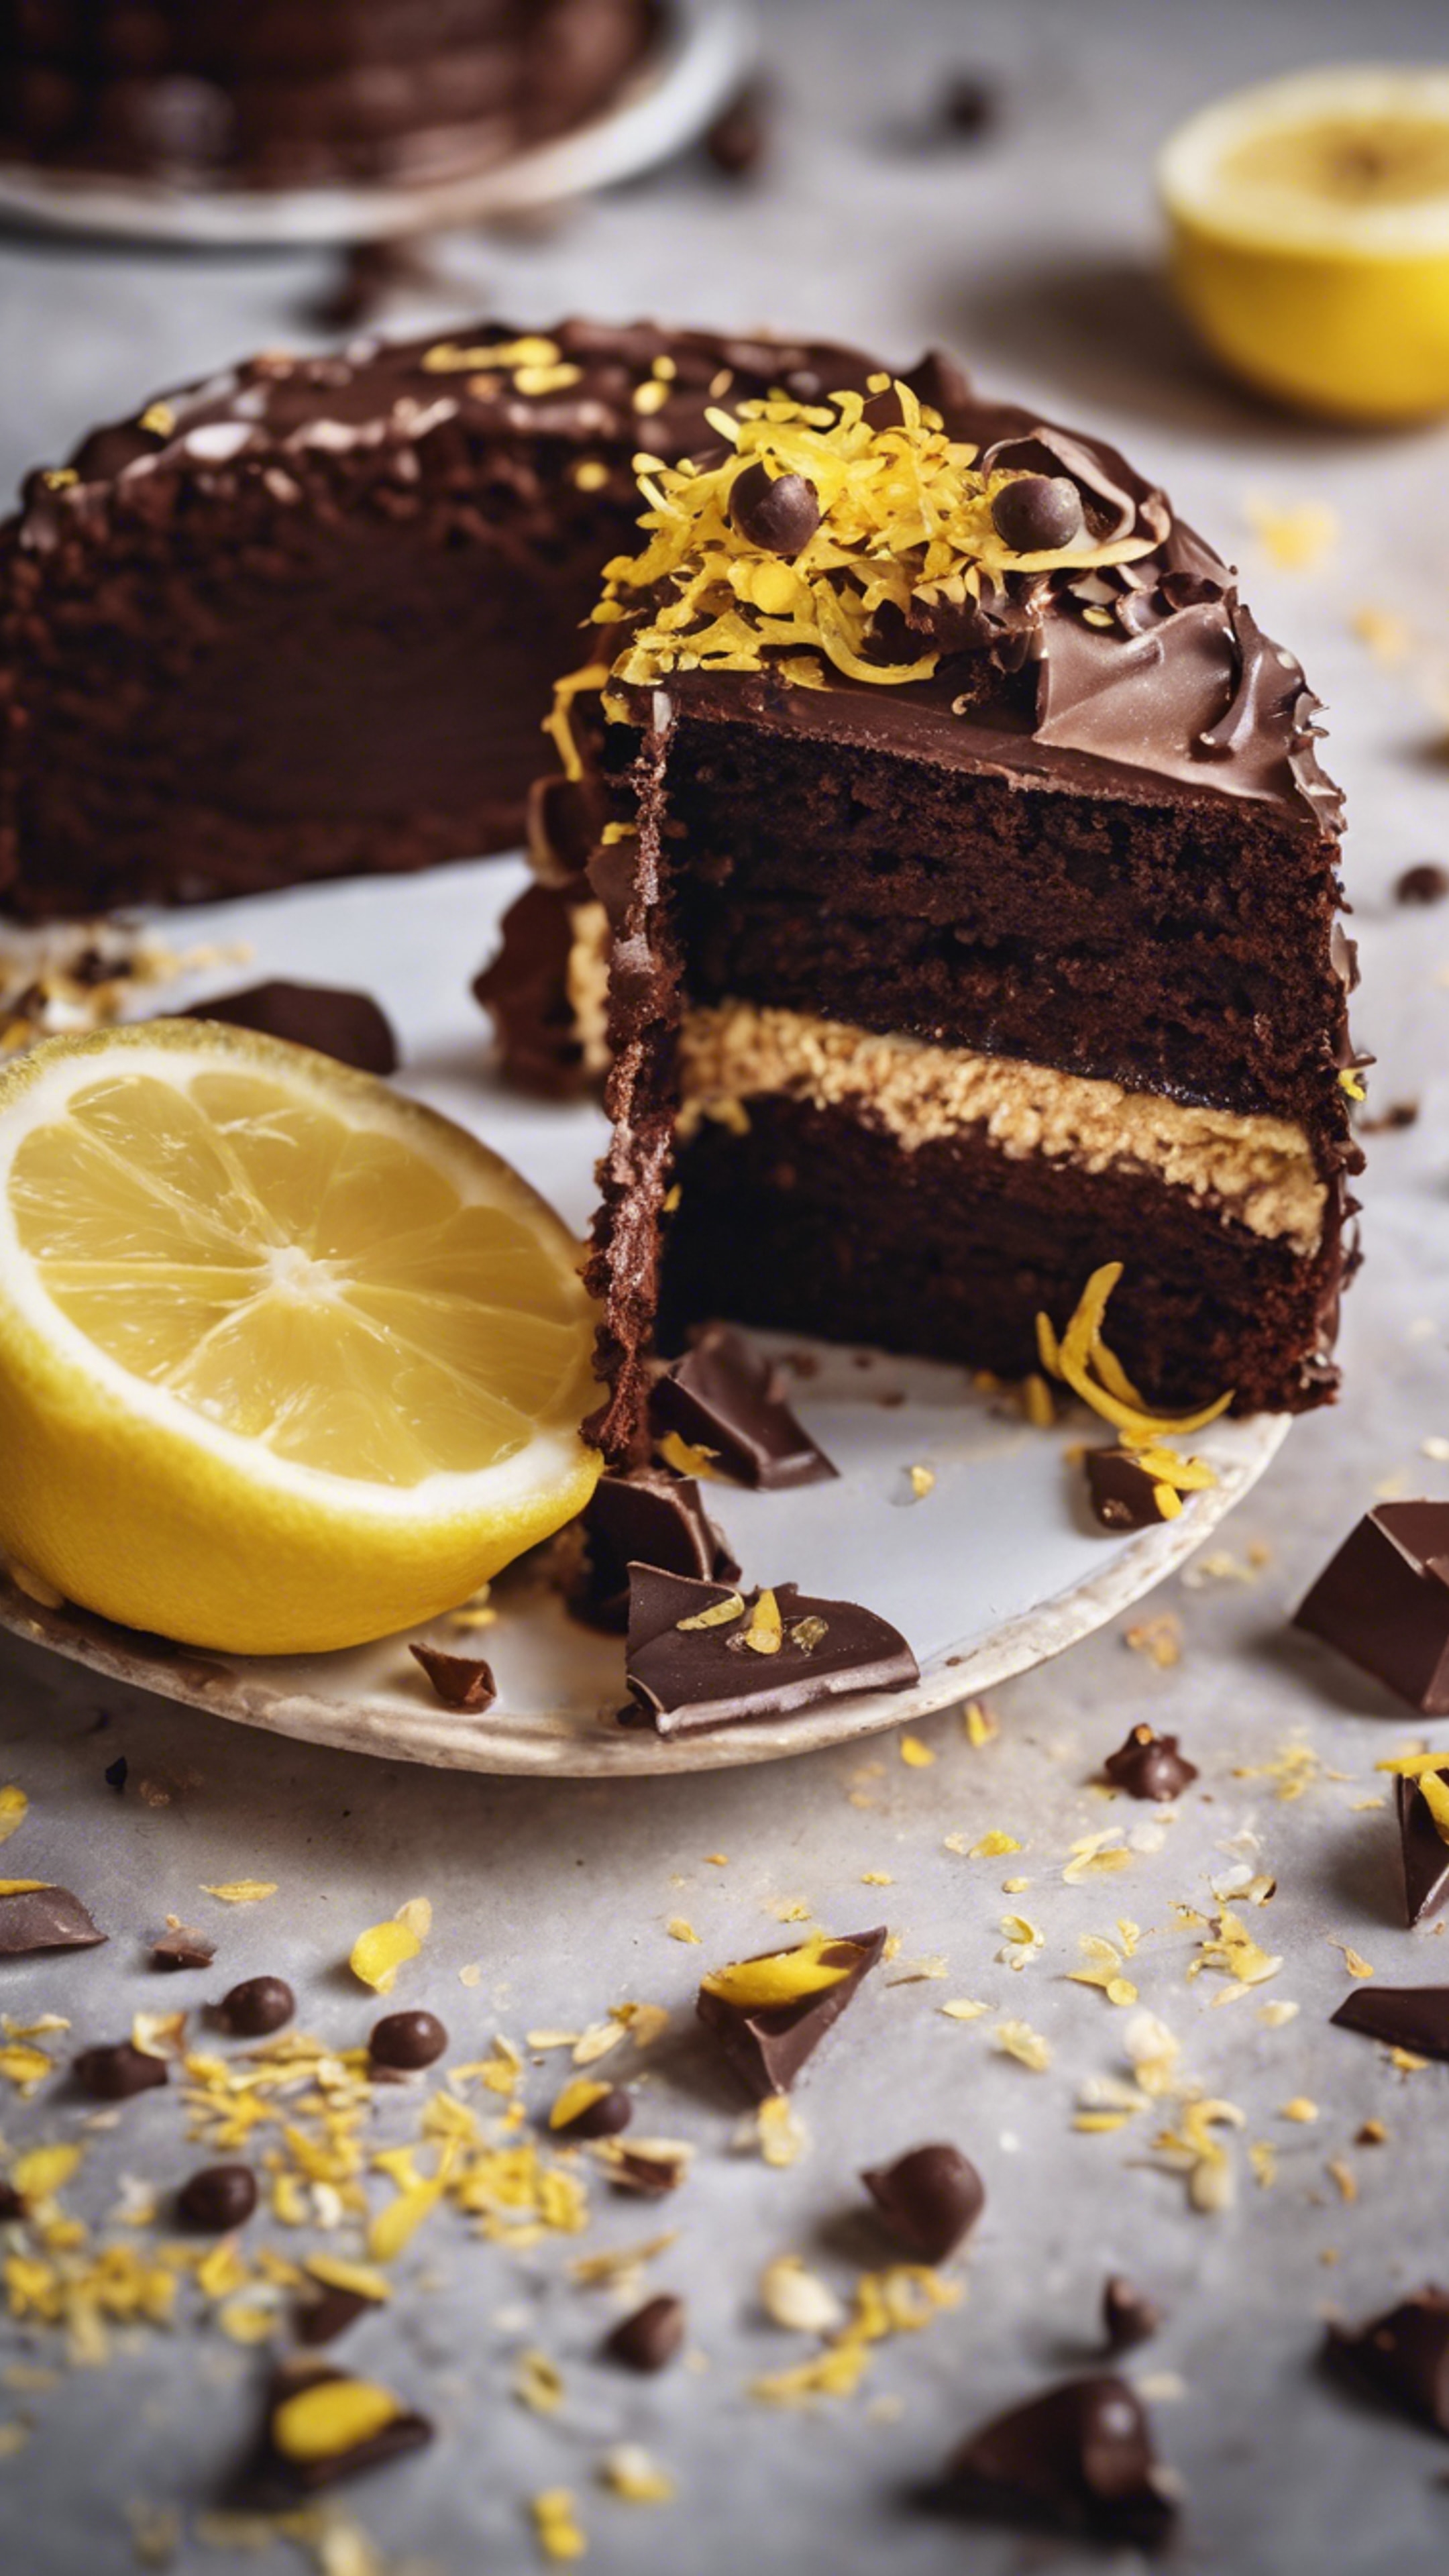 A slice of rich chocolate cake with yellow lemon zest sprinkled on top. Tapeta[a5c73c6ece1941b4ba95]